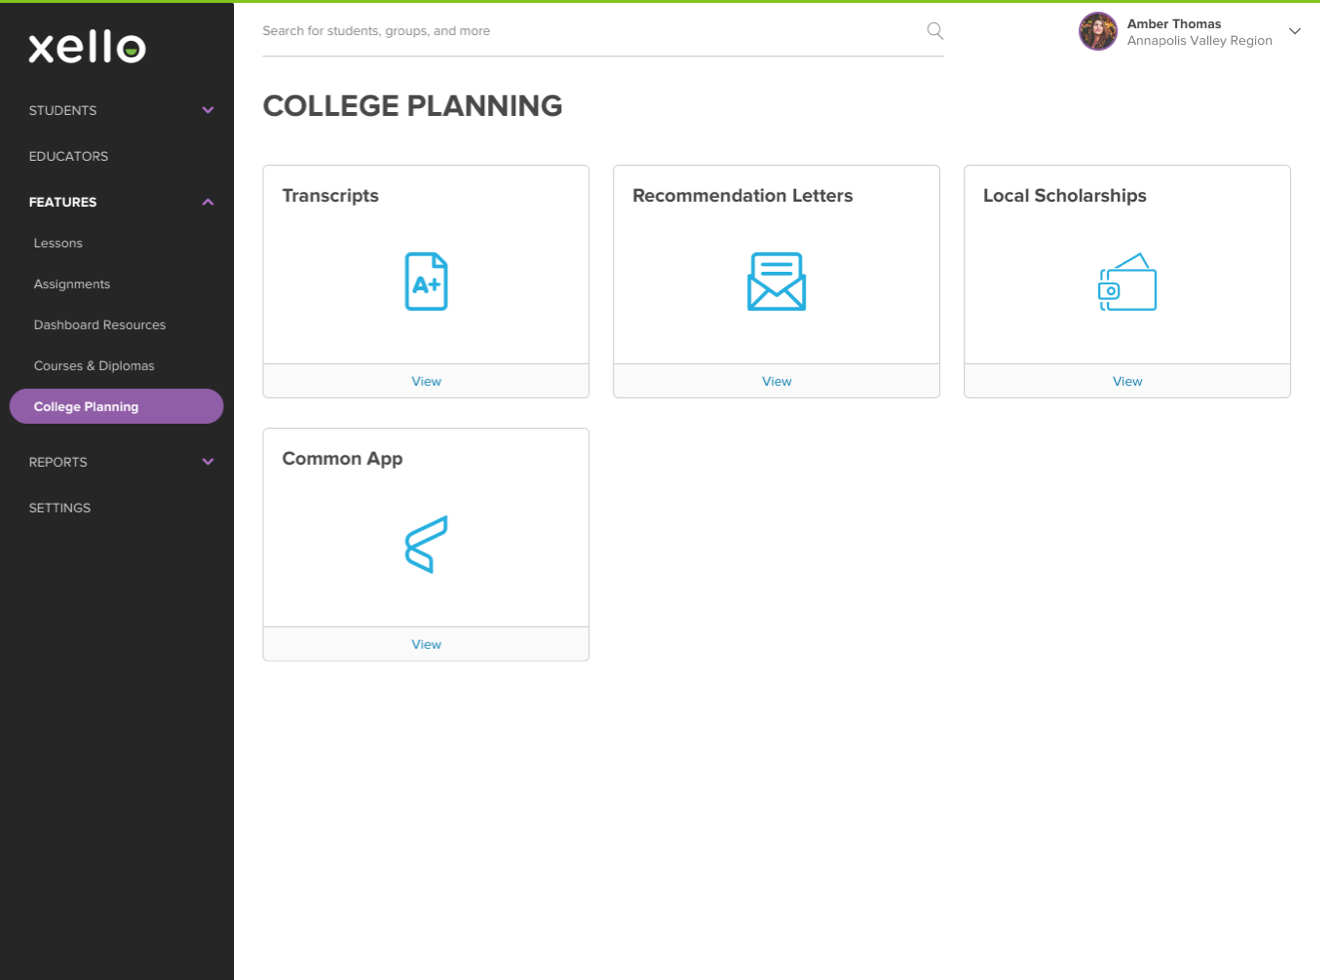 College Planning section in Educator Tools